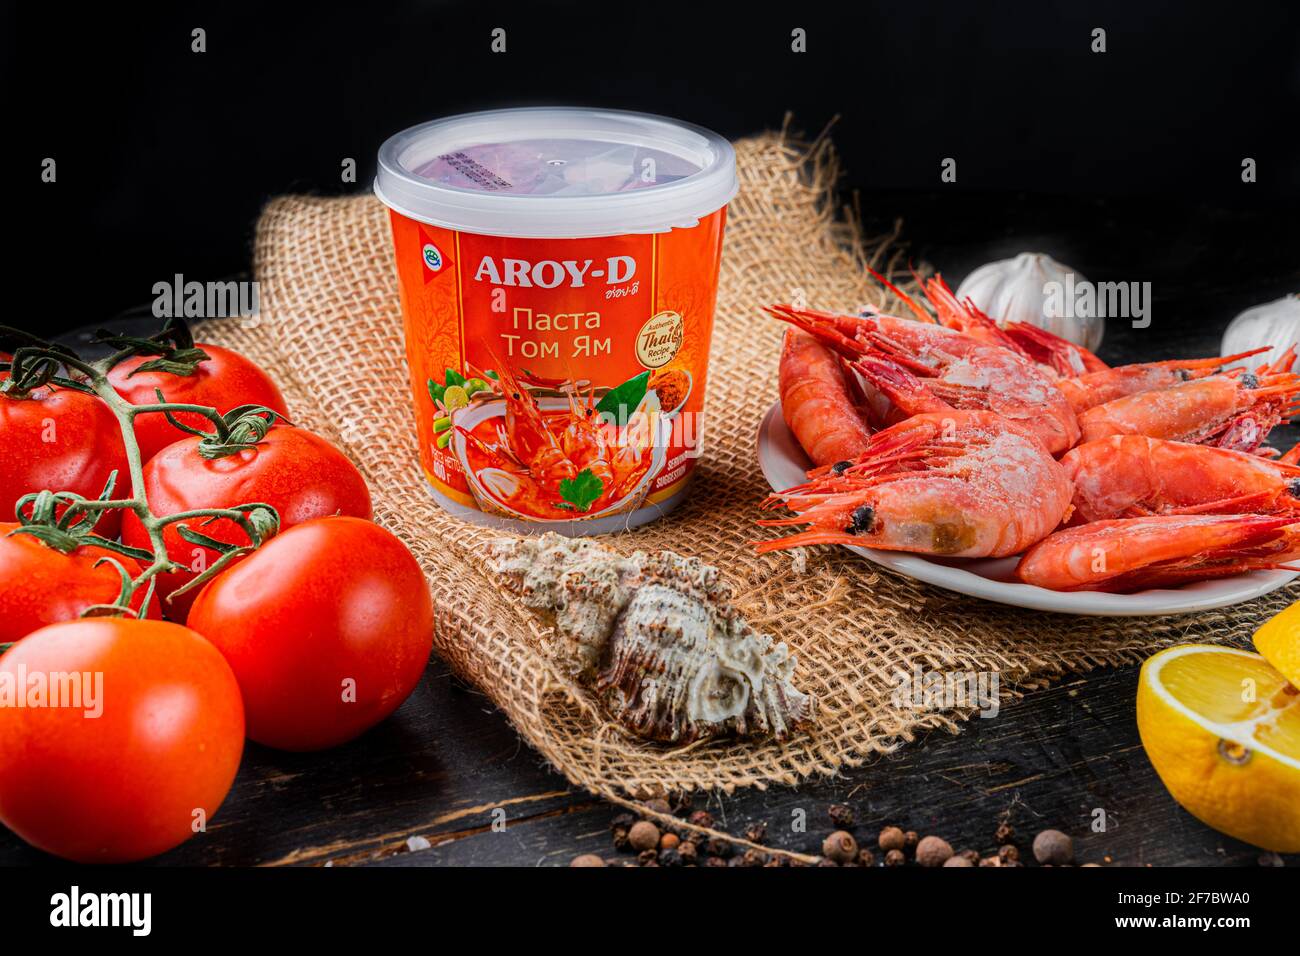 Plastic jar of Tom Yam Paste brand name AROY-D. Tom Yam paste is made by crushing all the herb ingredients and stir frying in oil Stock Photo